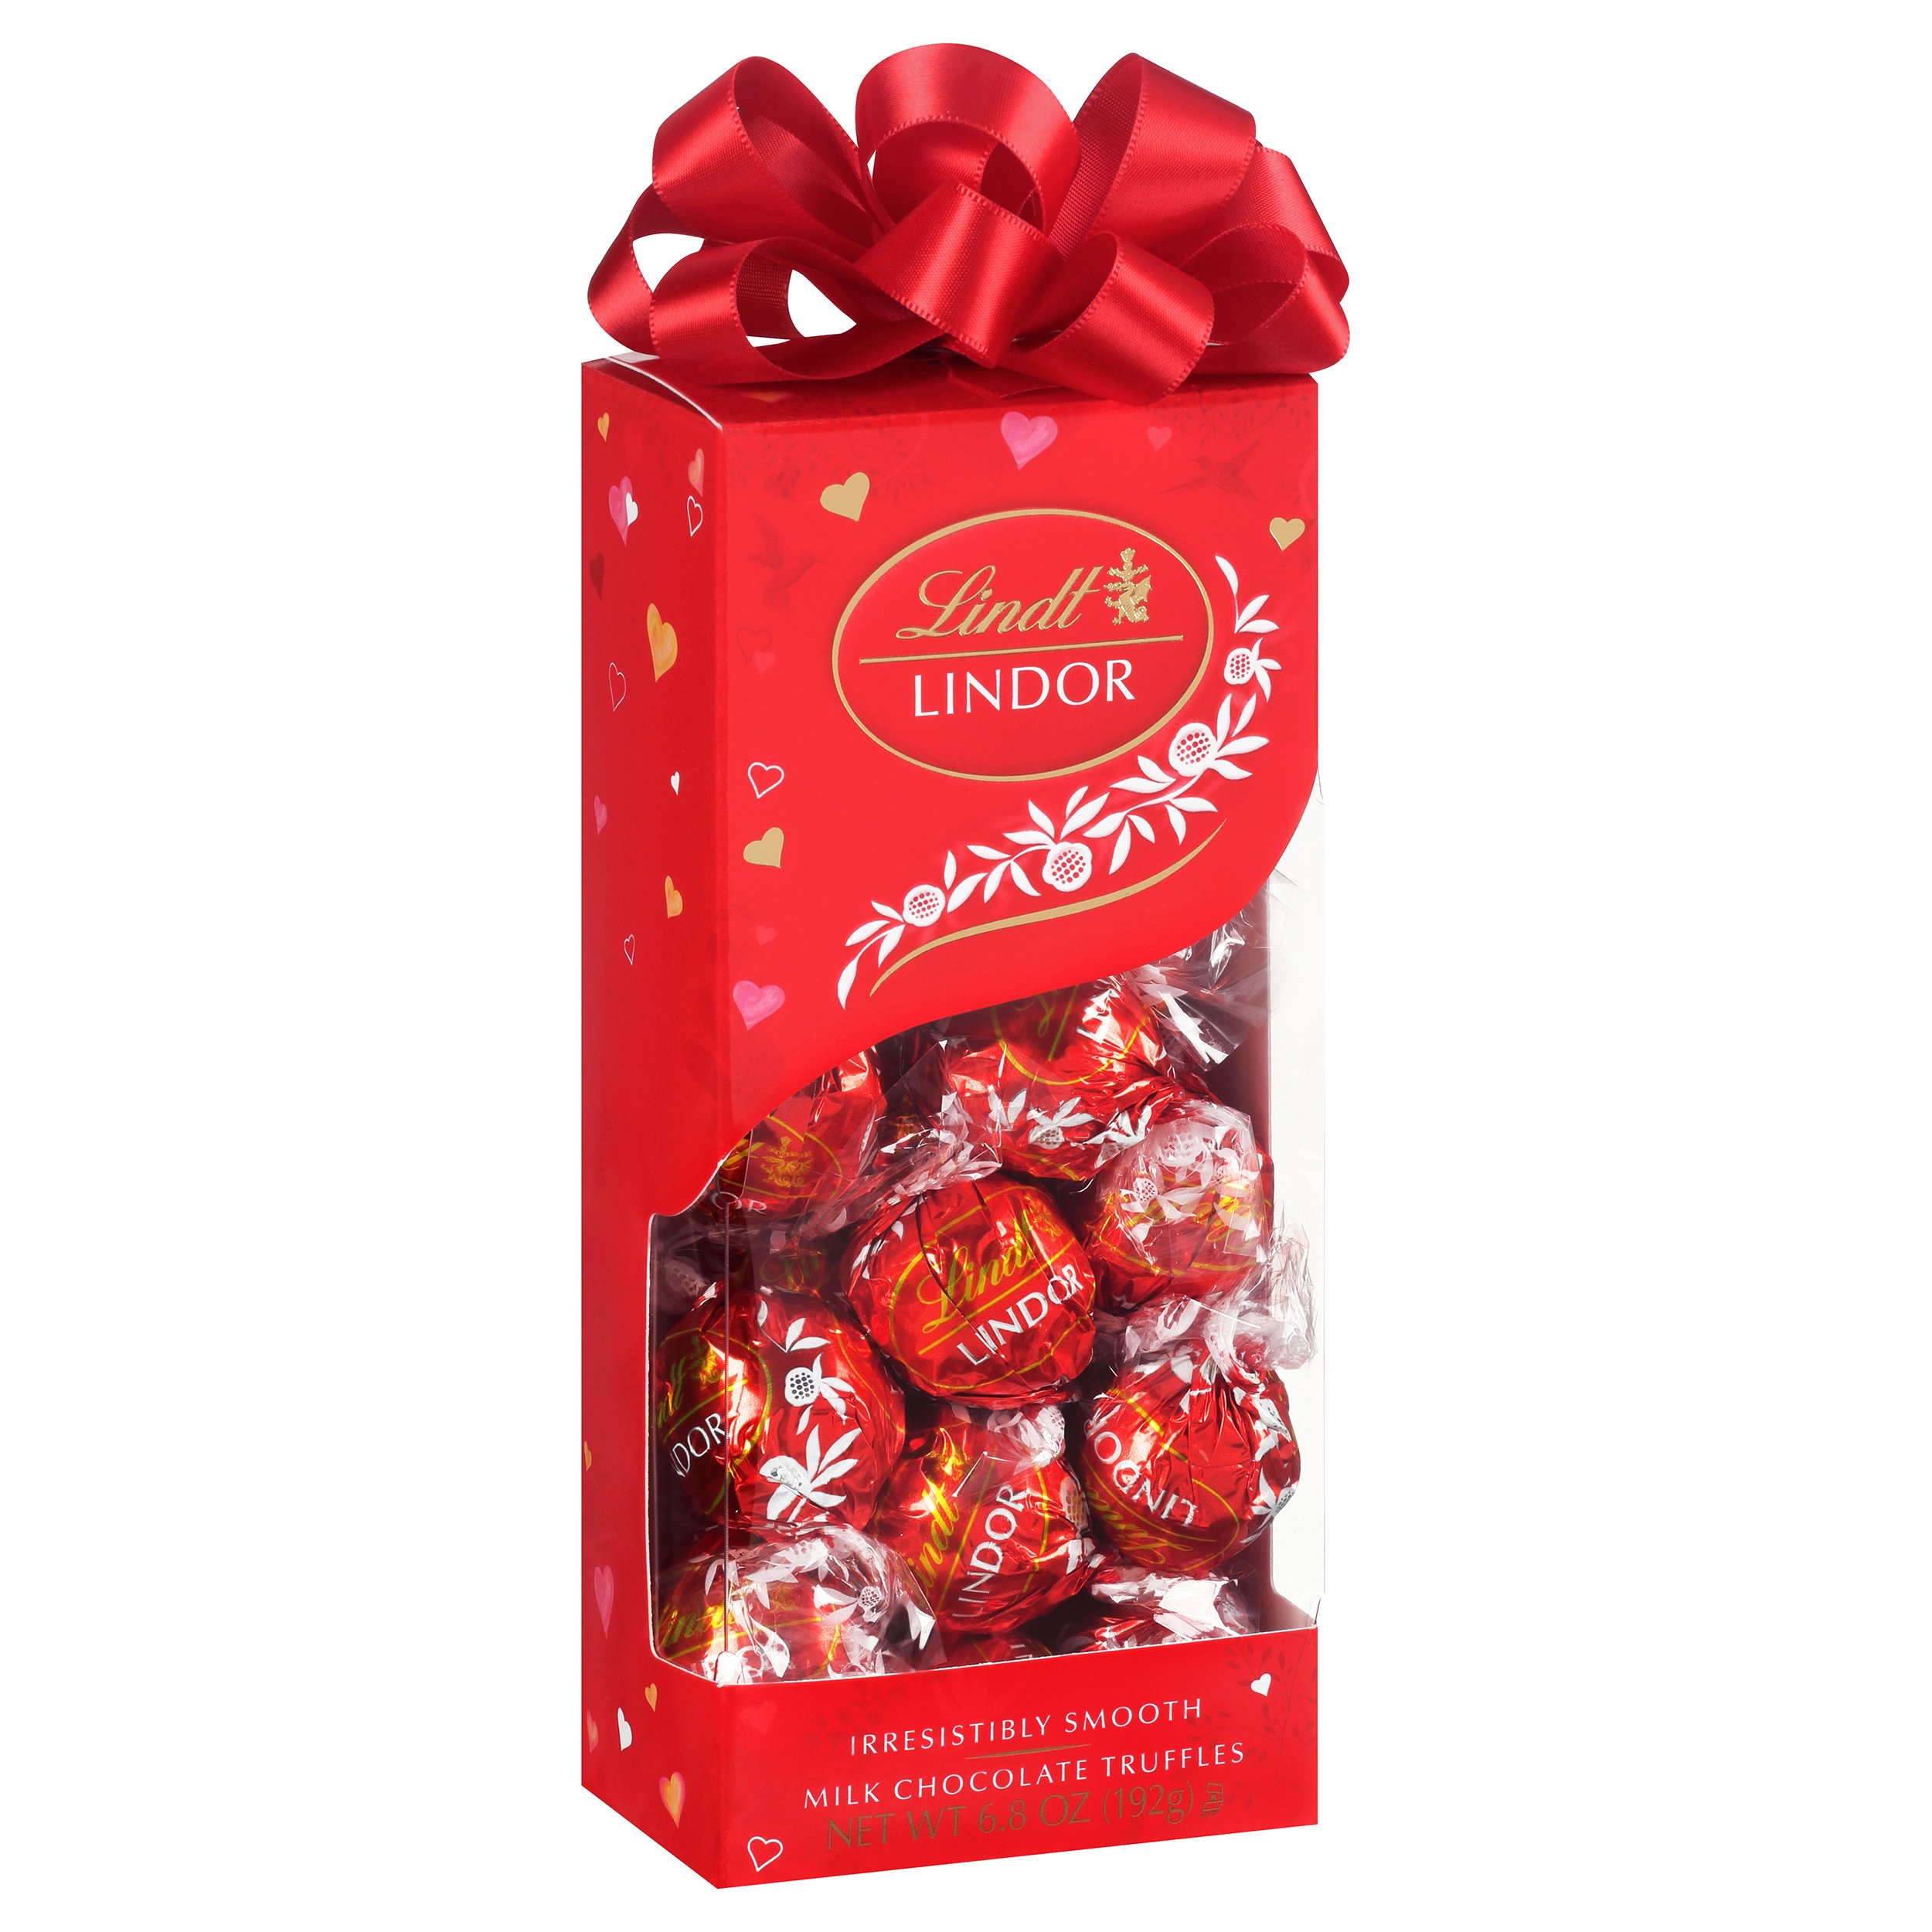 Lindt Lindt White Chocolate Truffles - Shop Candy at H-E-B